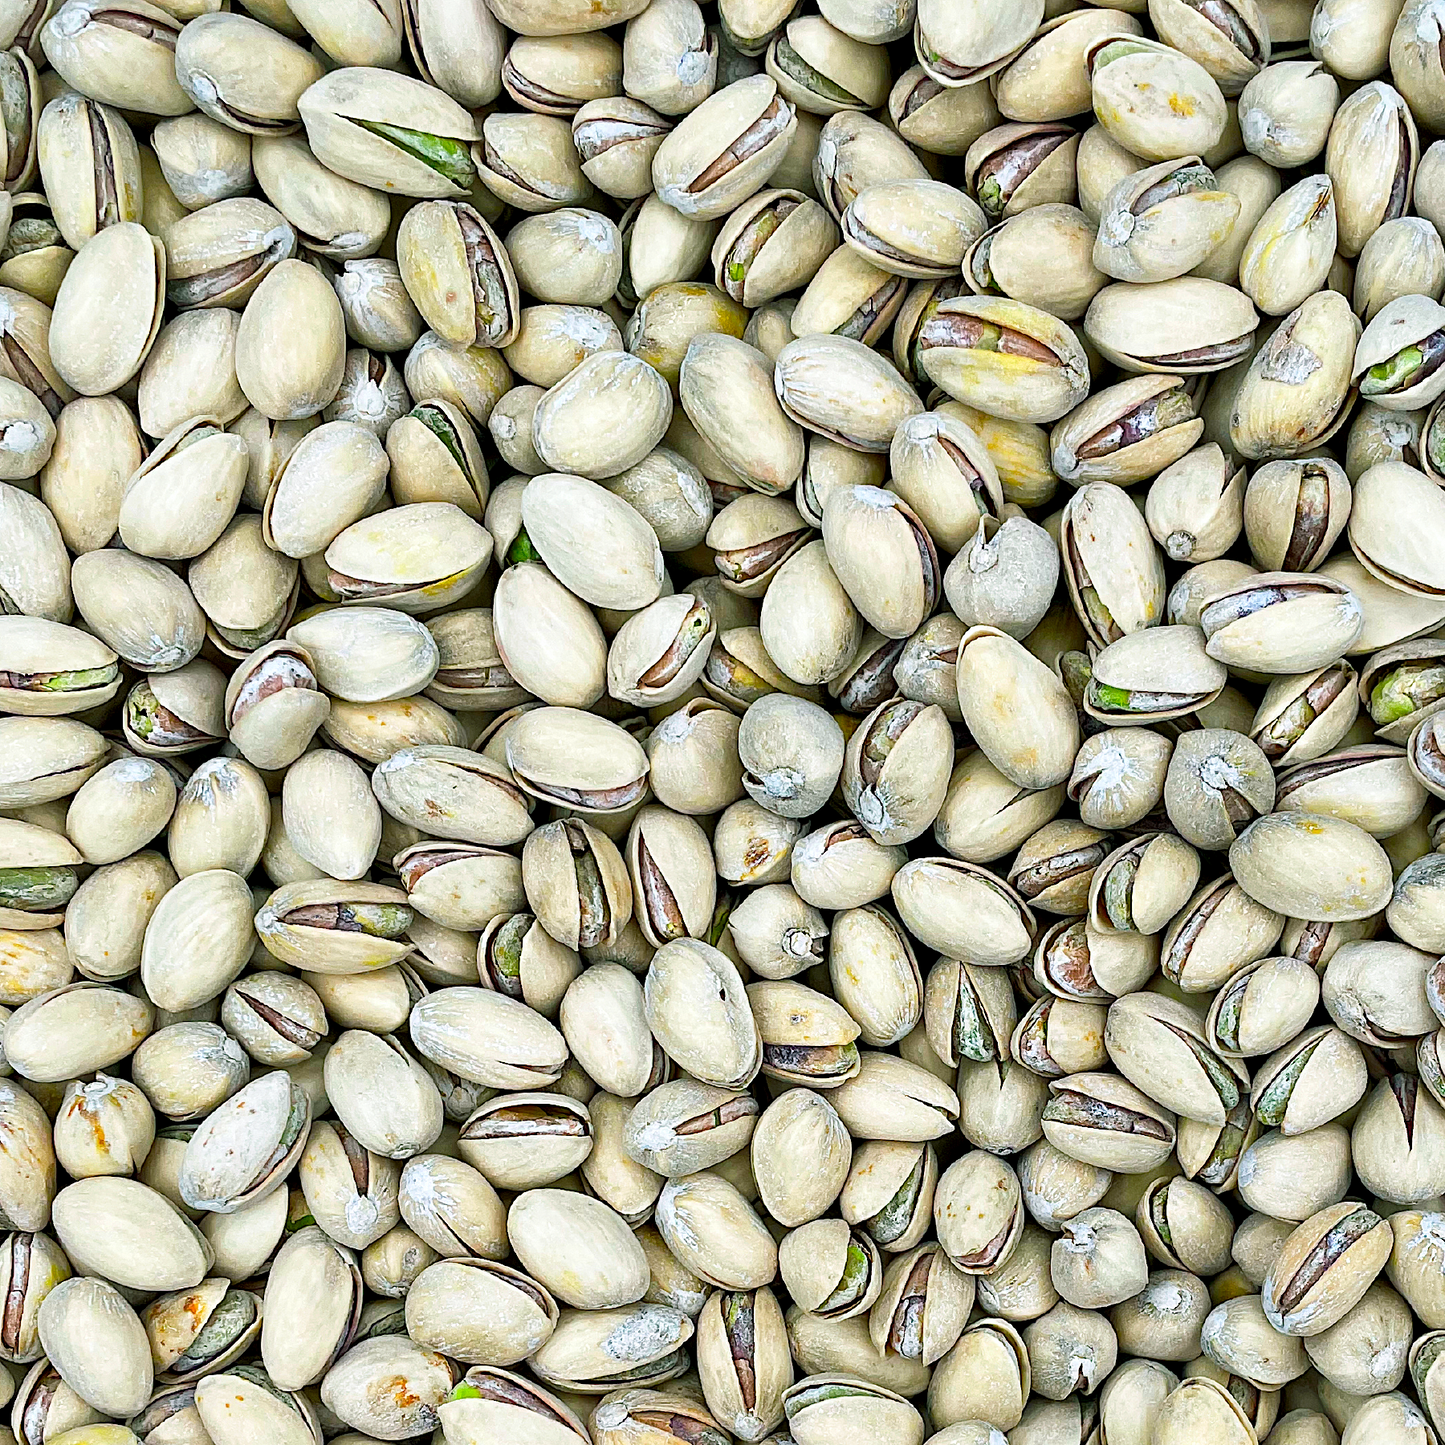 Pistachios - Roasted, Salted, Organic